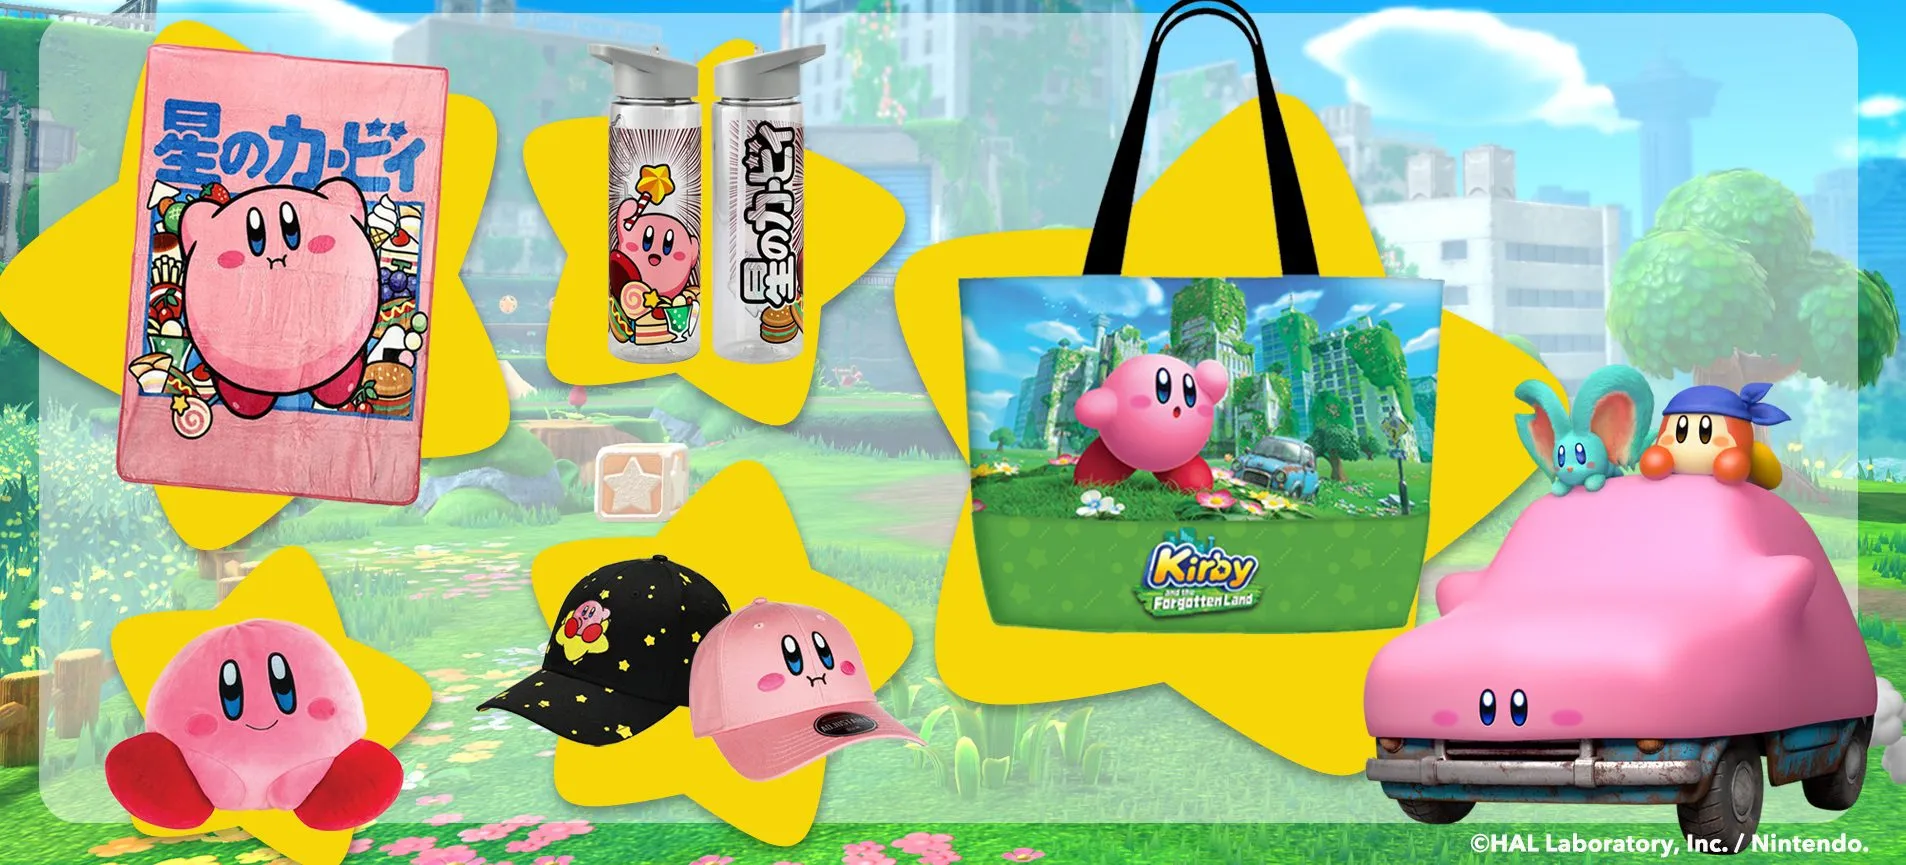 There's a My Nintendo Kirby contest with a really cute prize pack